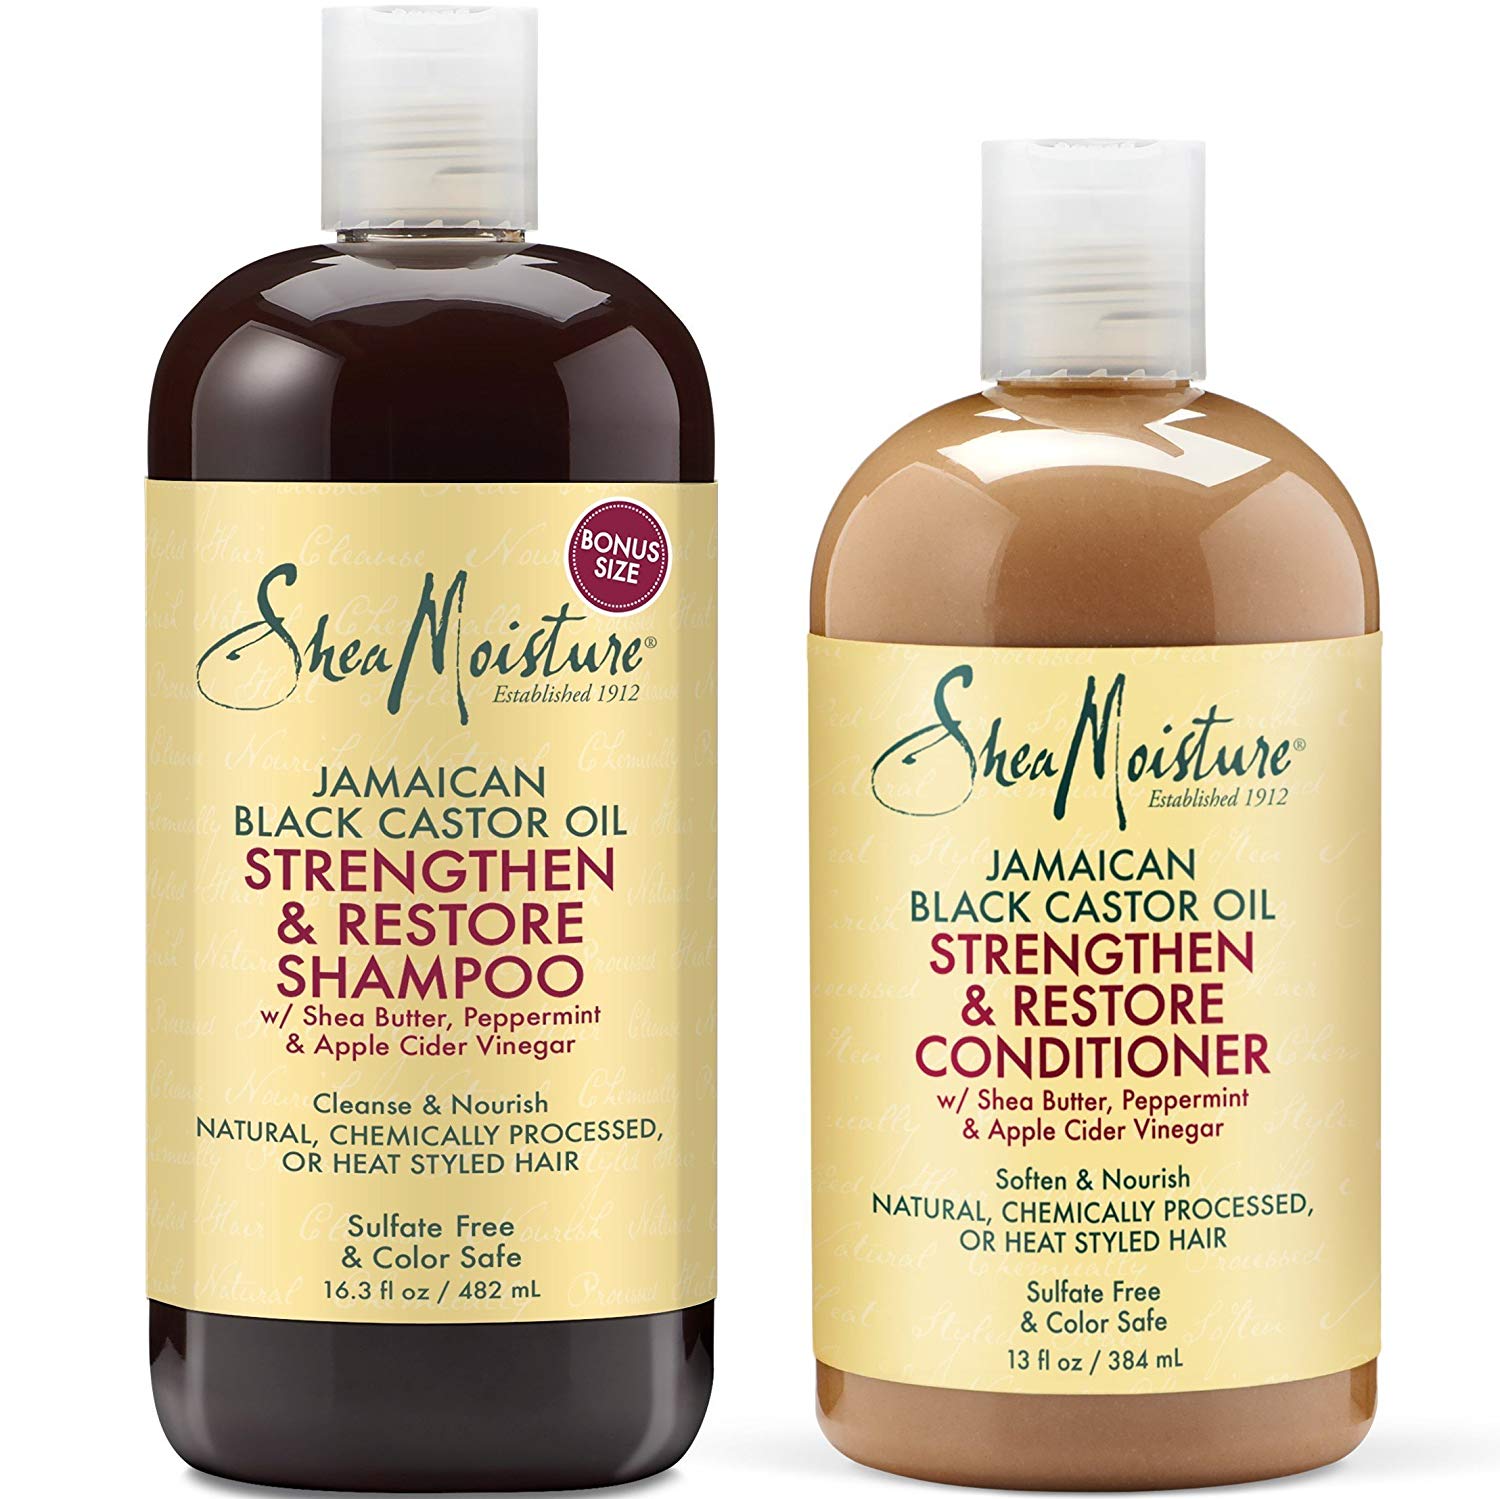 Shea Moisture For Frizzy Curly Hair - Curly Hair Style